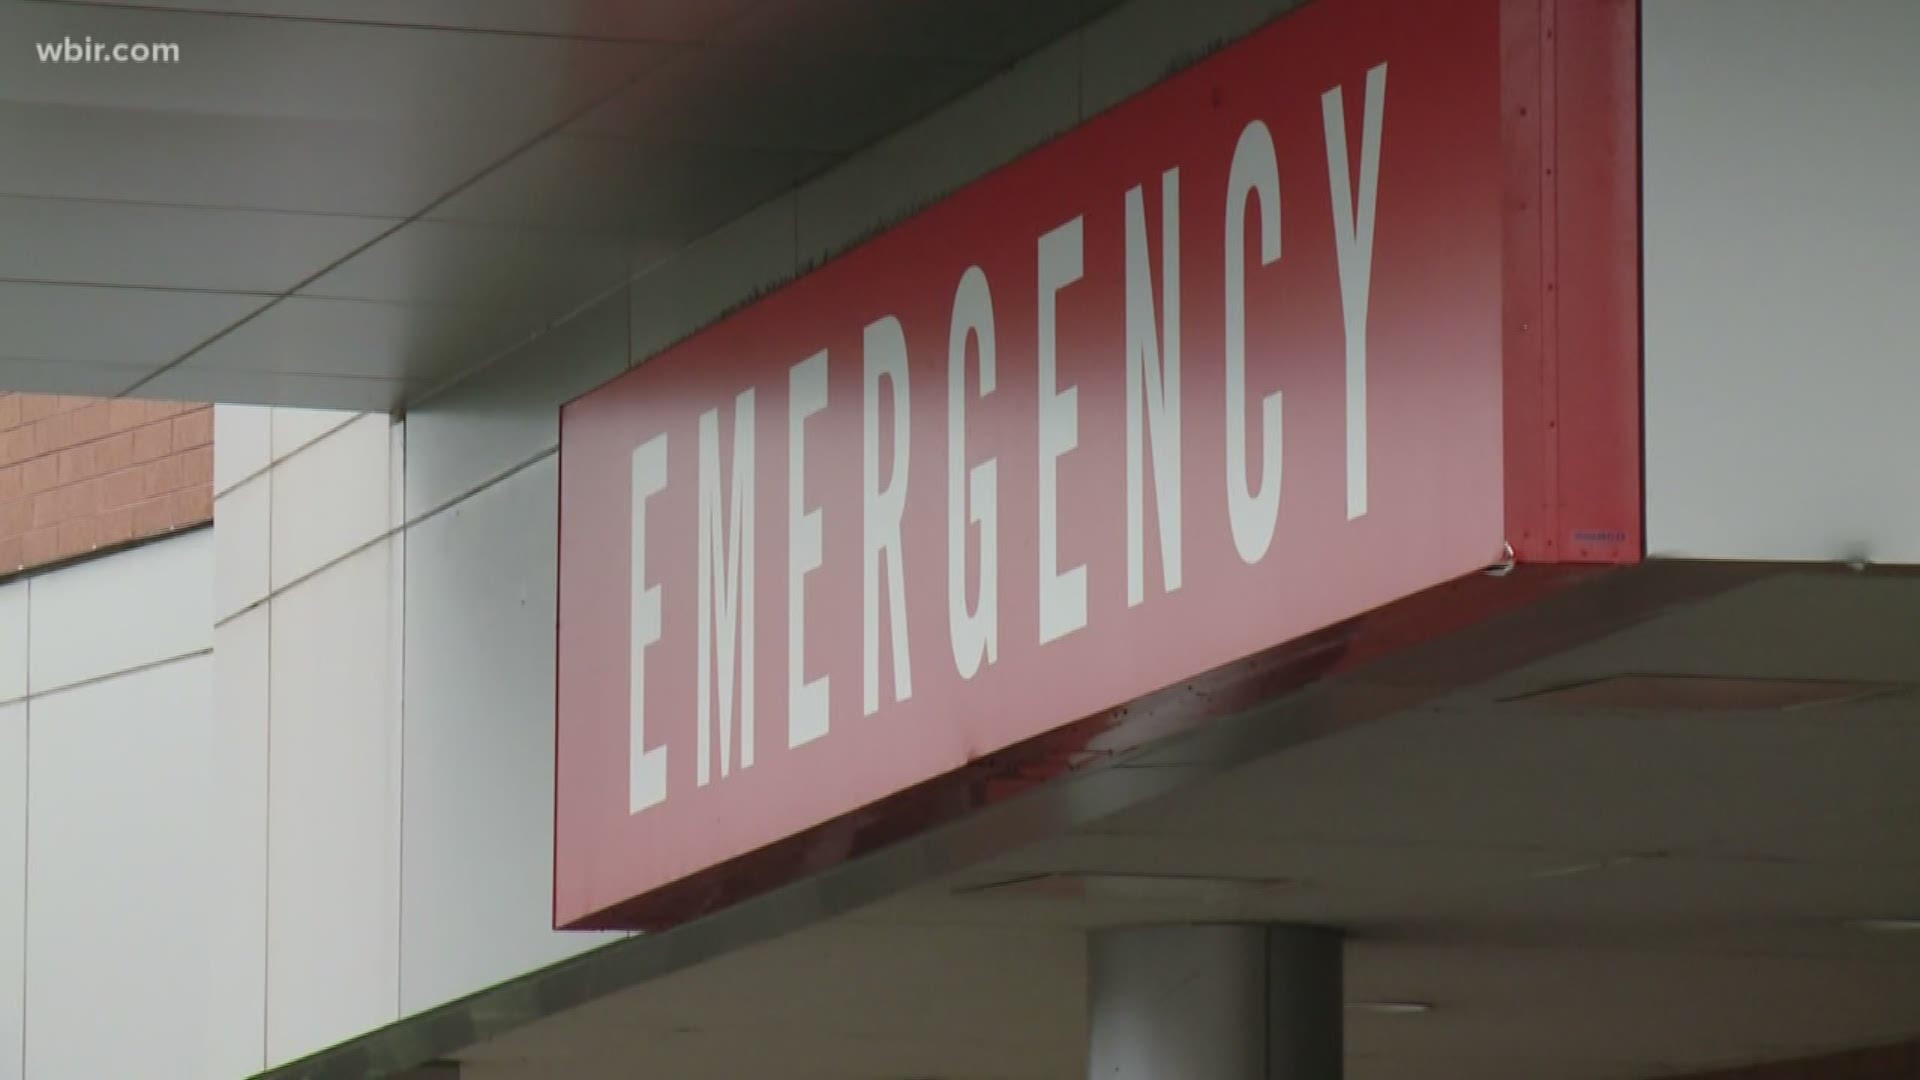 With one less emergency room in town, other hospitals are having to meet the demand. Some hospitals have seen wait times jump, others have had to tell ambulances their ER is too full for more patients.